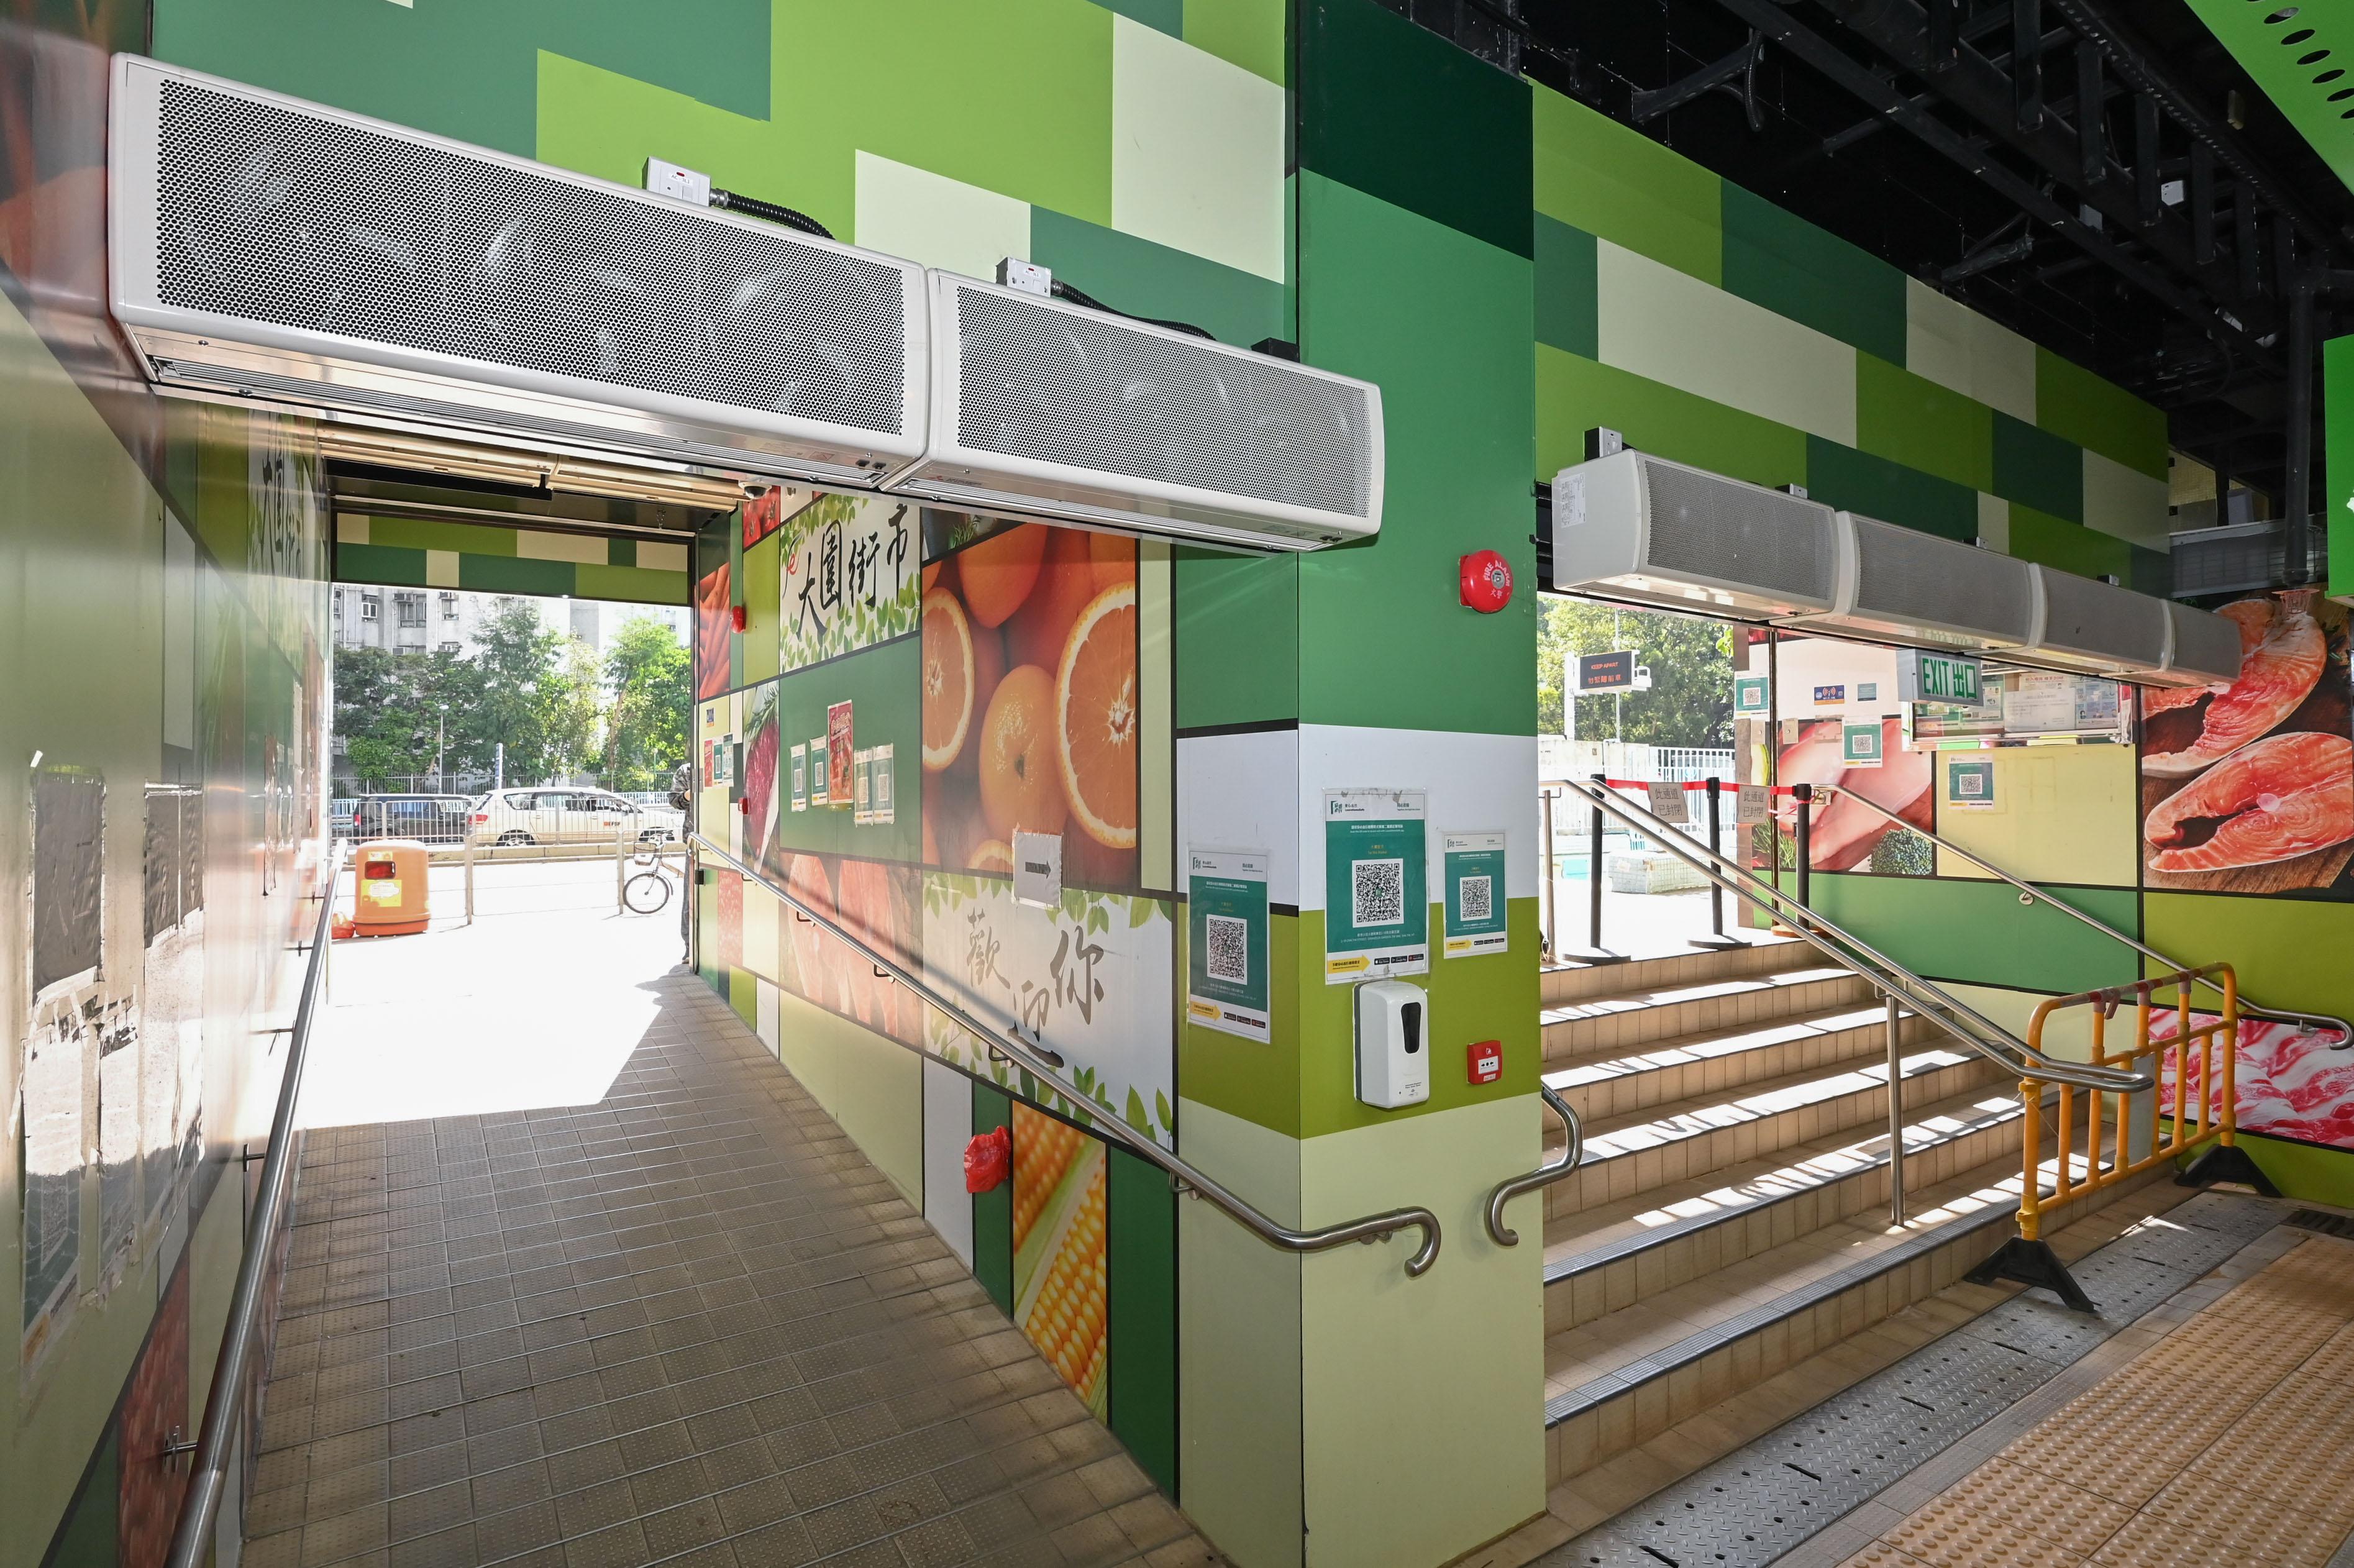 The Food and Environmental Hygiene Department and the Architectural Services Department have completed a series of improvement works at Tai Wai Market, including installing facilities such as air curtains at the entrances to improve the efficiency of the air conditioning system of the market.